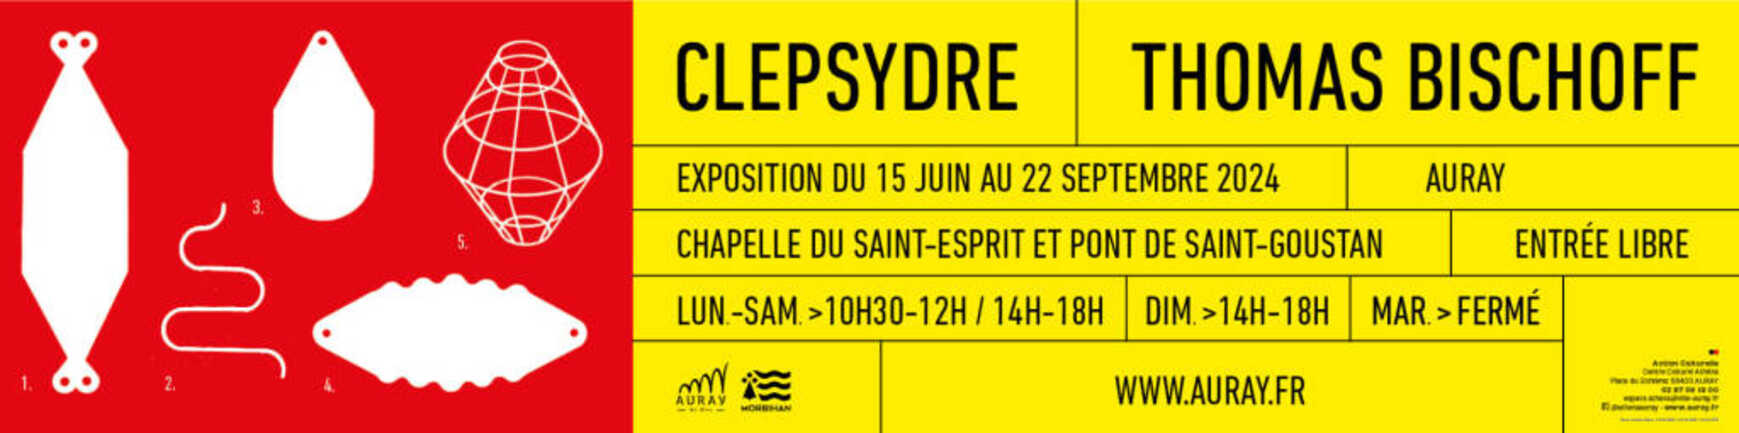 Exposition Clepsydre